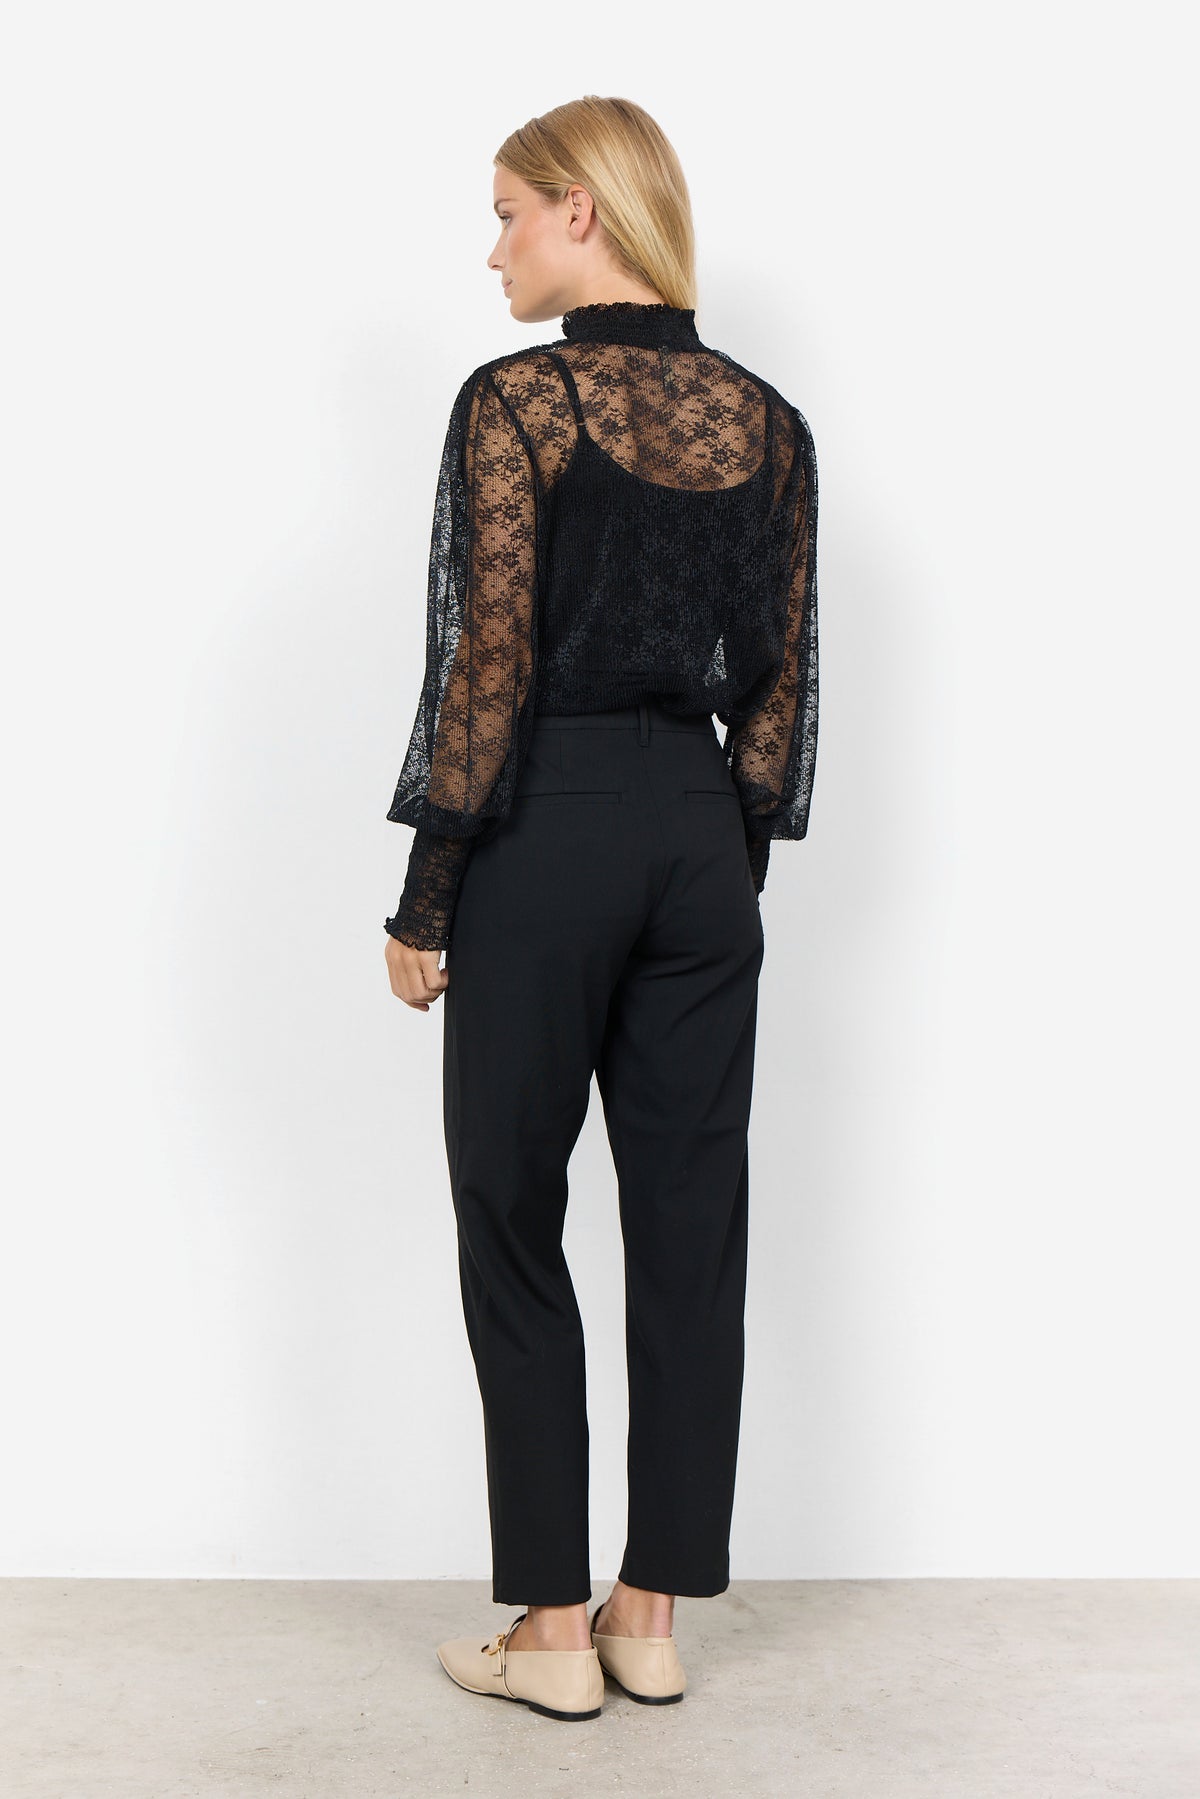 The Vallie Lace Top